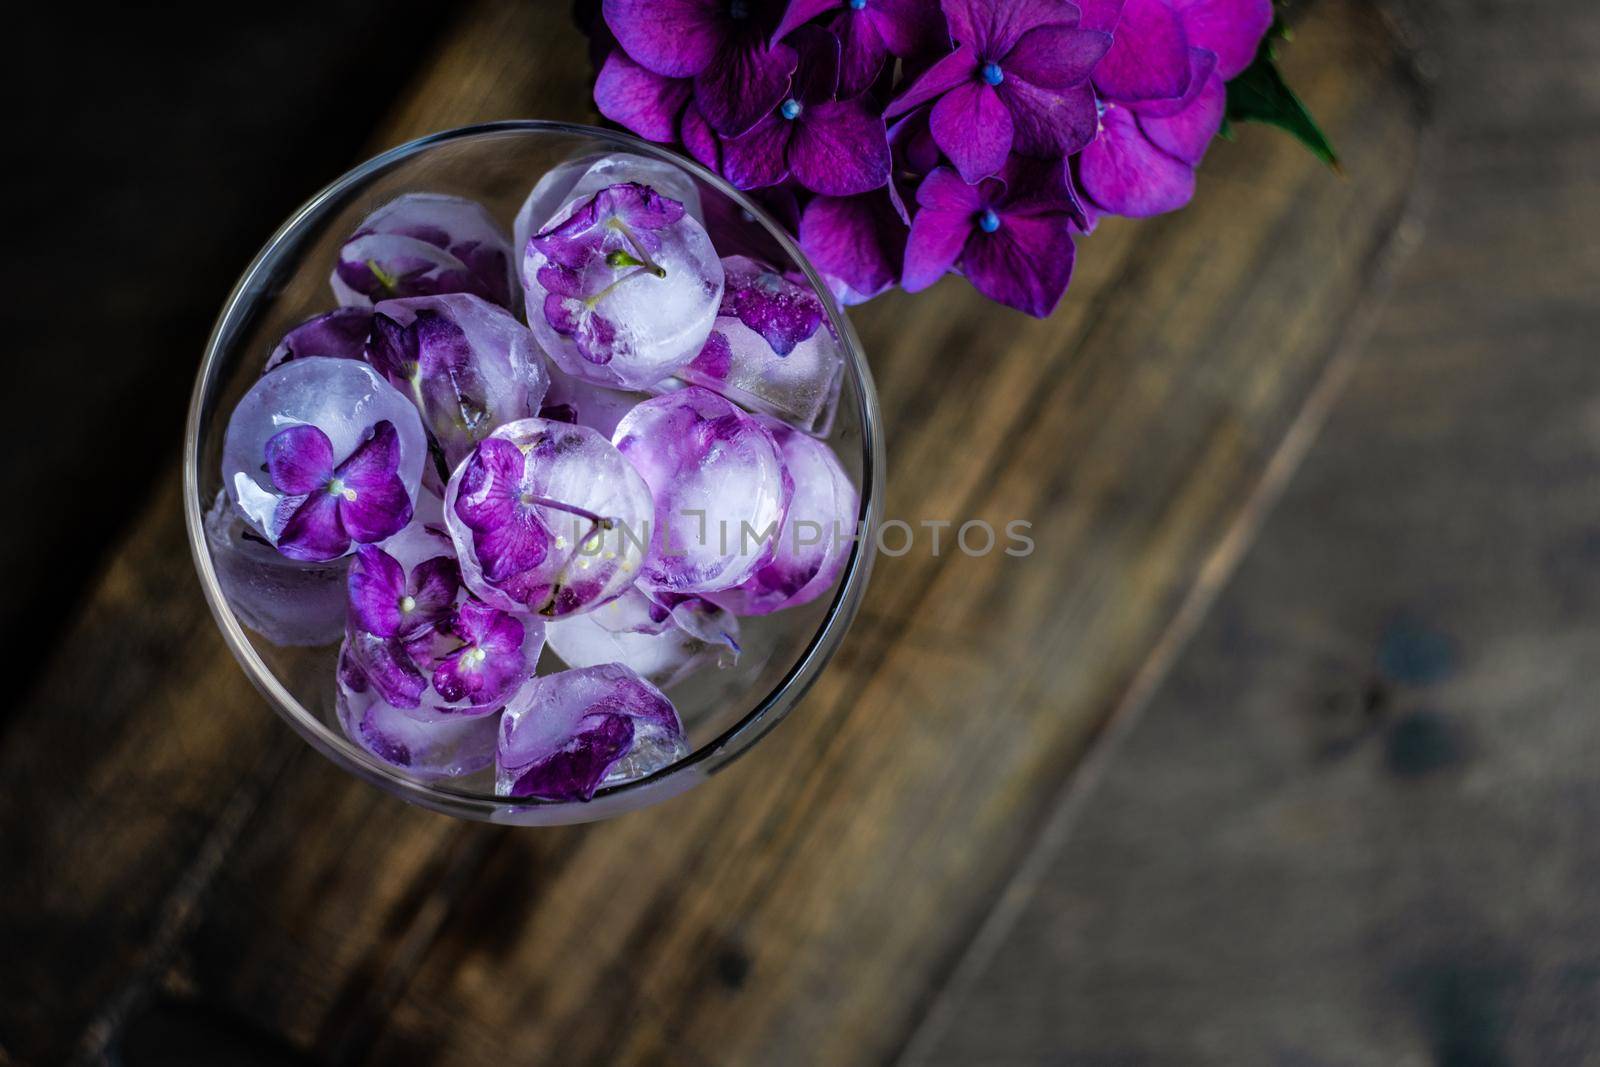 Glass with flower ice cubes by Elet